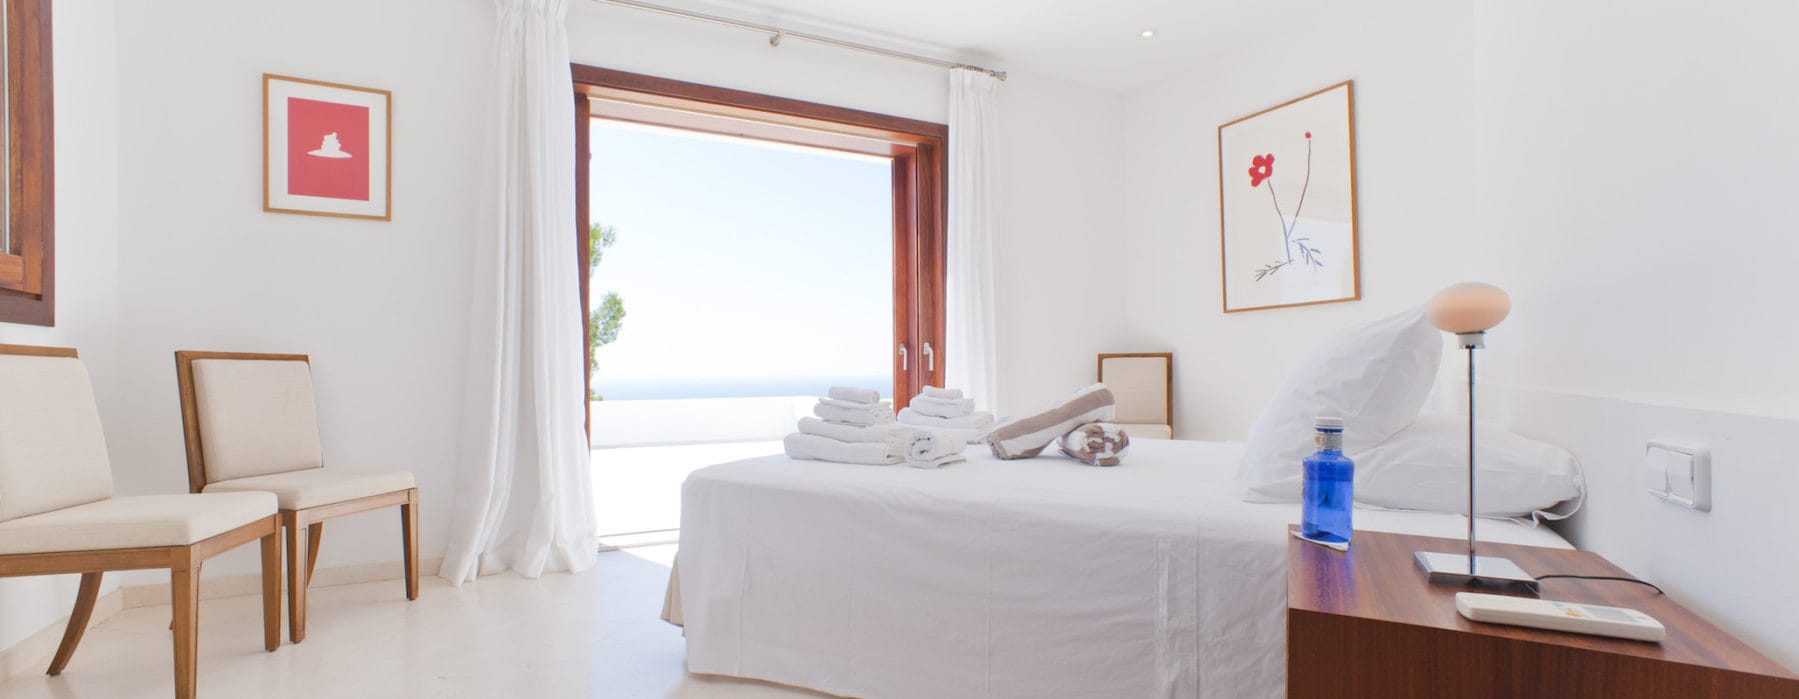 Double bedroom in white and wooden design with access to sea view terrace